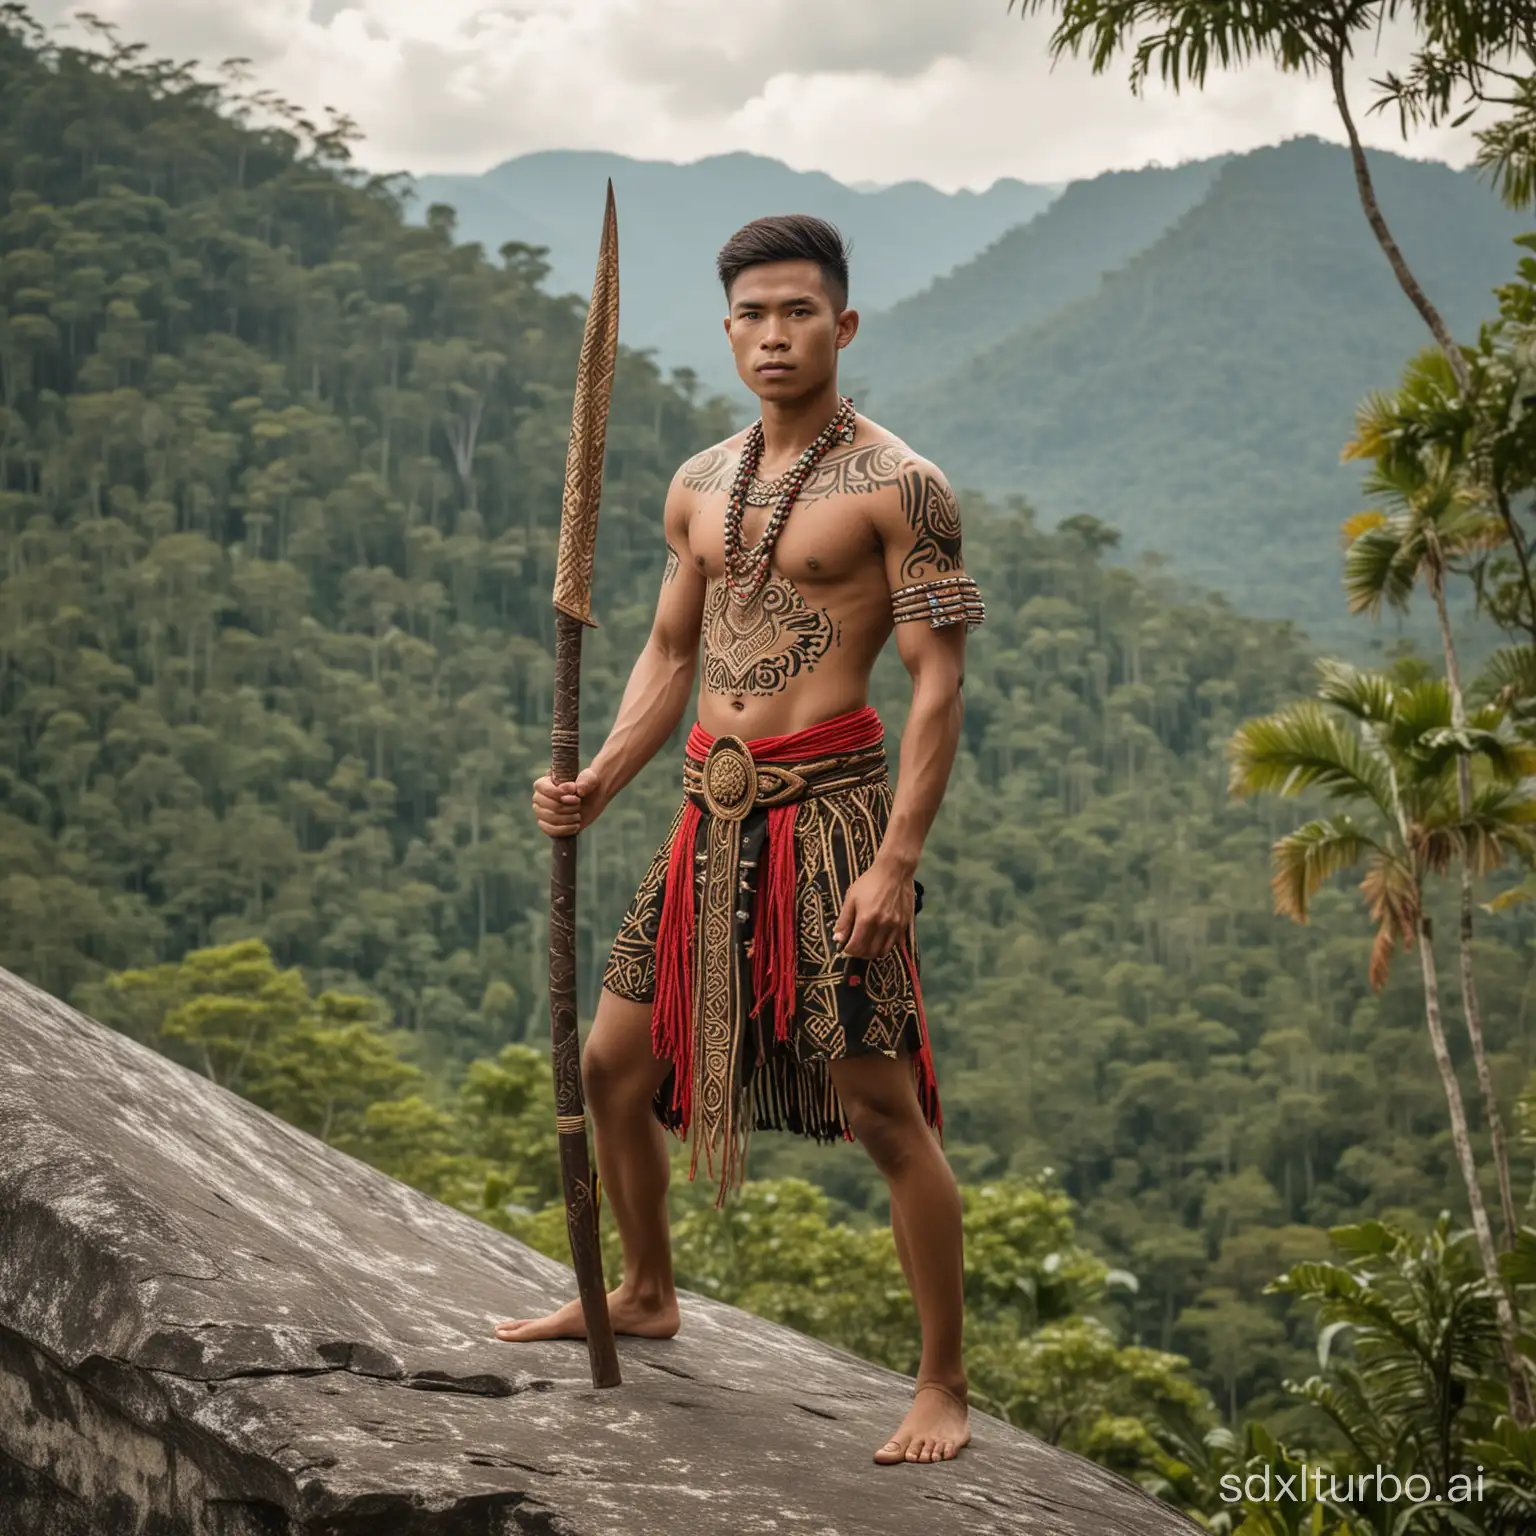 a young man with an Indonesian face wearing traditional Borneo Dayak clothing holding a traditional Mandau weapon standing pose on a large rock with a wilderness background